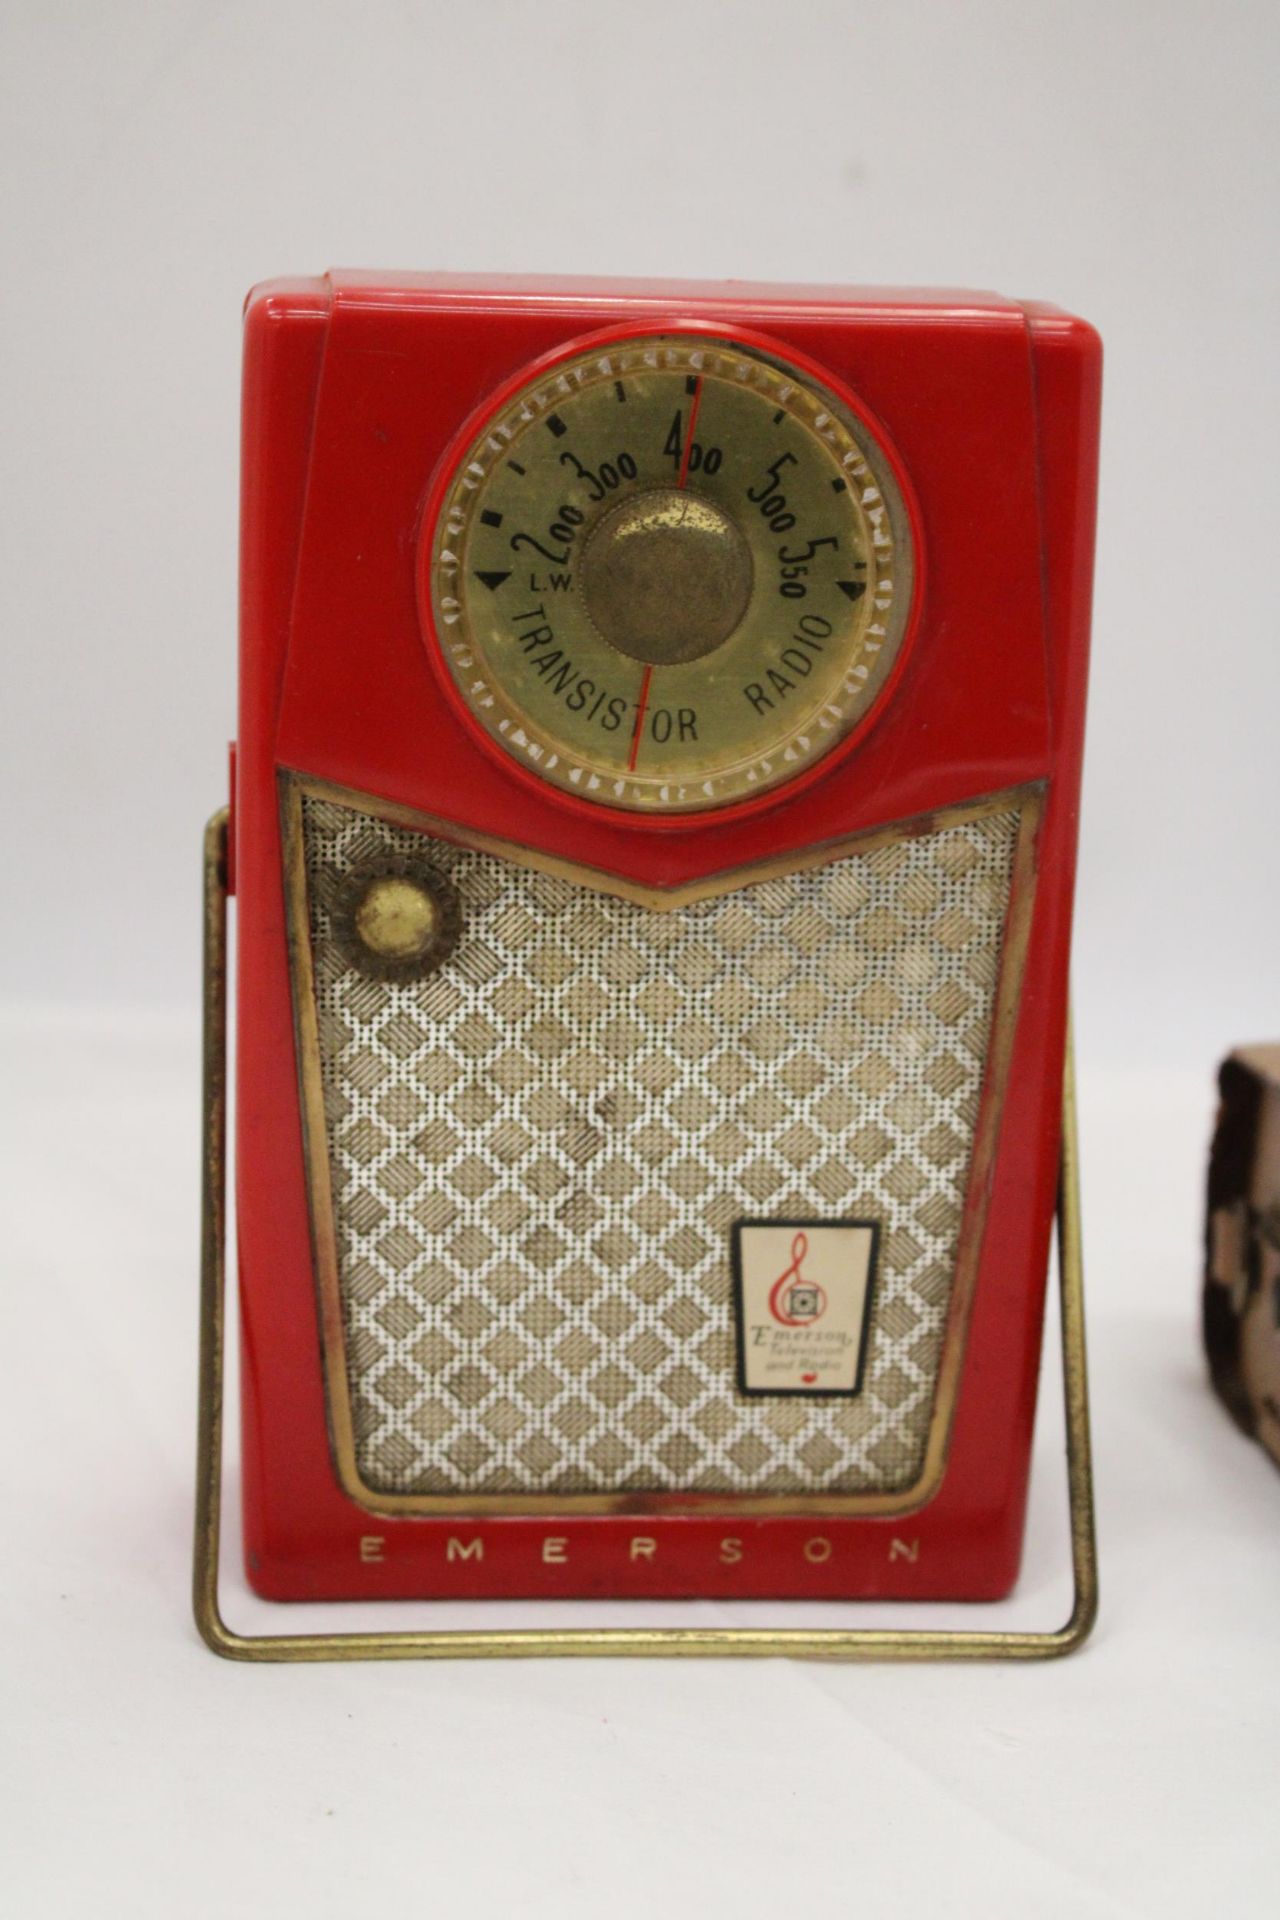 A VINTAGE EMERSON TRANSISTOR RADIO IN ORIGINAL CASE PLUS AN ORIENTAL METAL PIN TRAY WITH DRAGON - Image 4 of 6